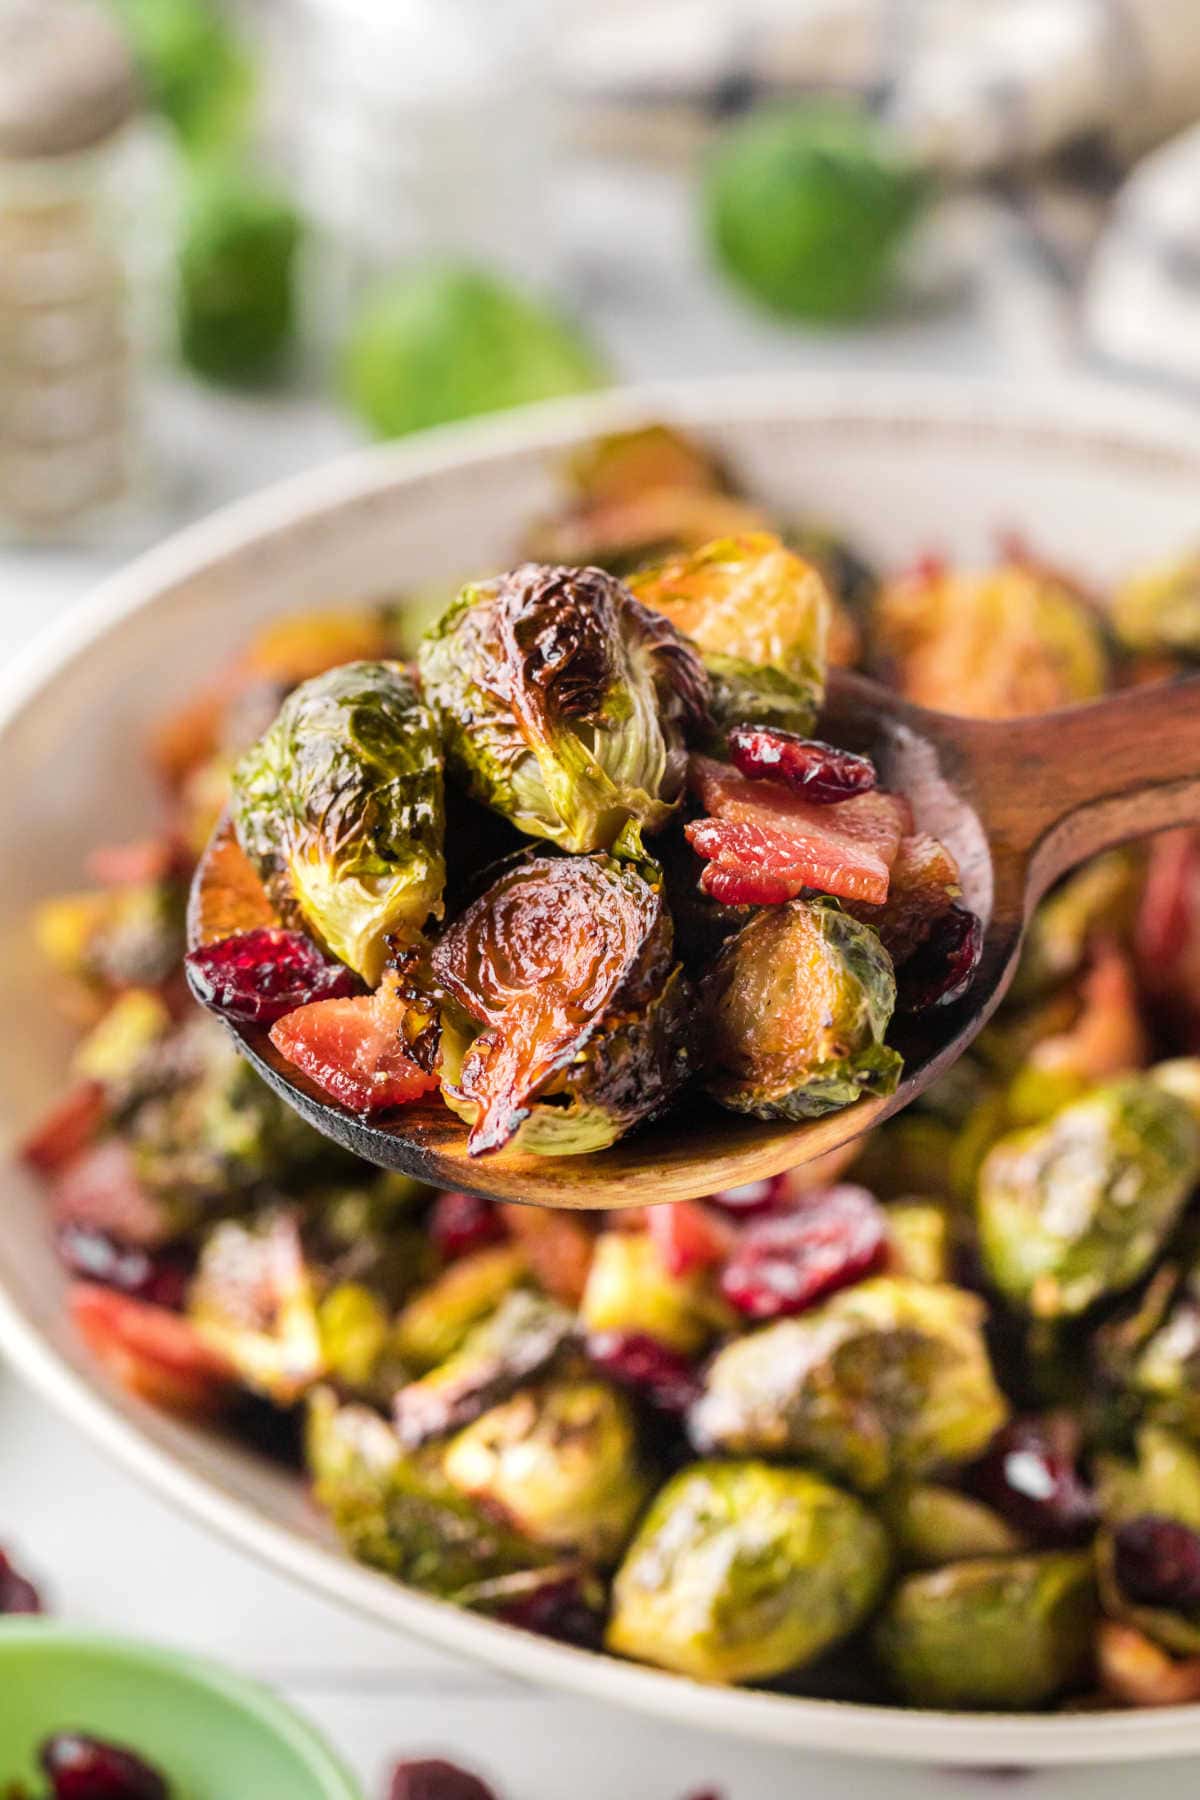 In the background, a large bowl with roasted bacon Brussels sprouts is shown. In the foreground, a large wooden spoon shows the camera a scoop of crispy Brussels sprouts, pieces of bacon, and cranberries.